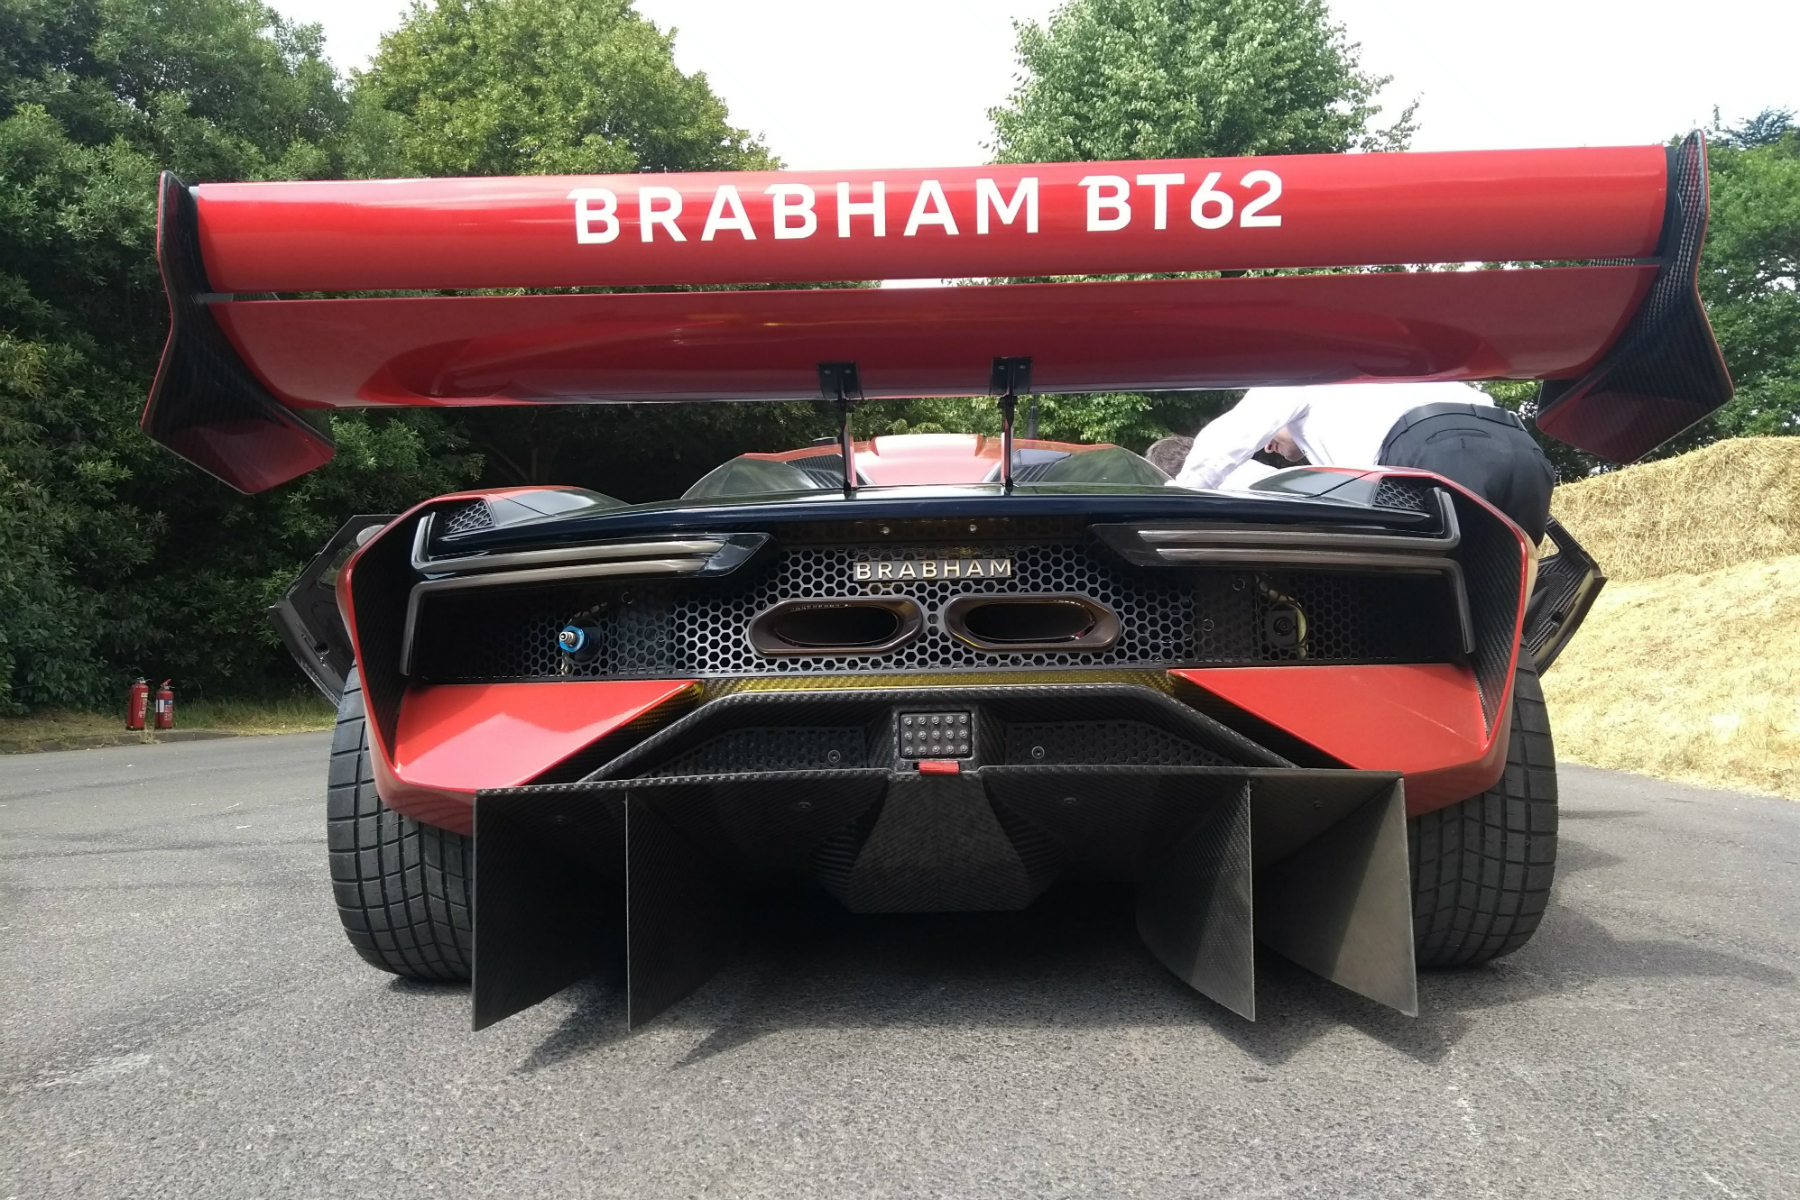 Flat-out in the new Brabham BT62 hypercar – first passenger ride